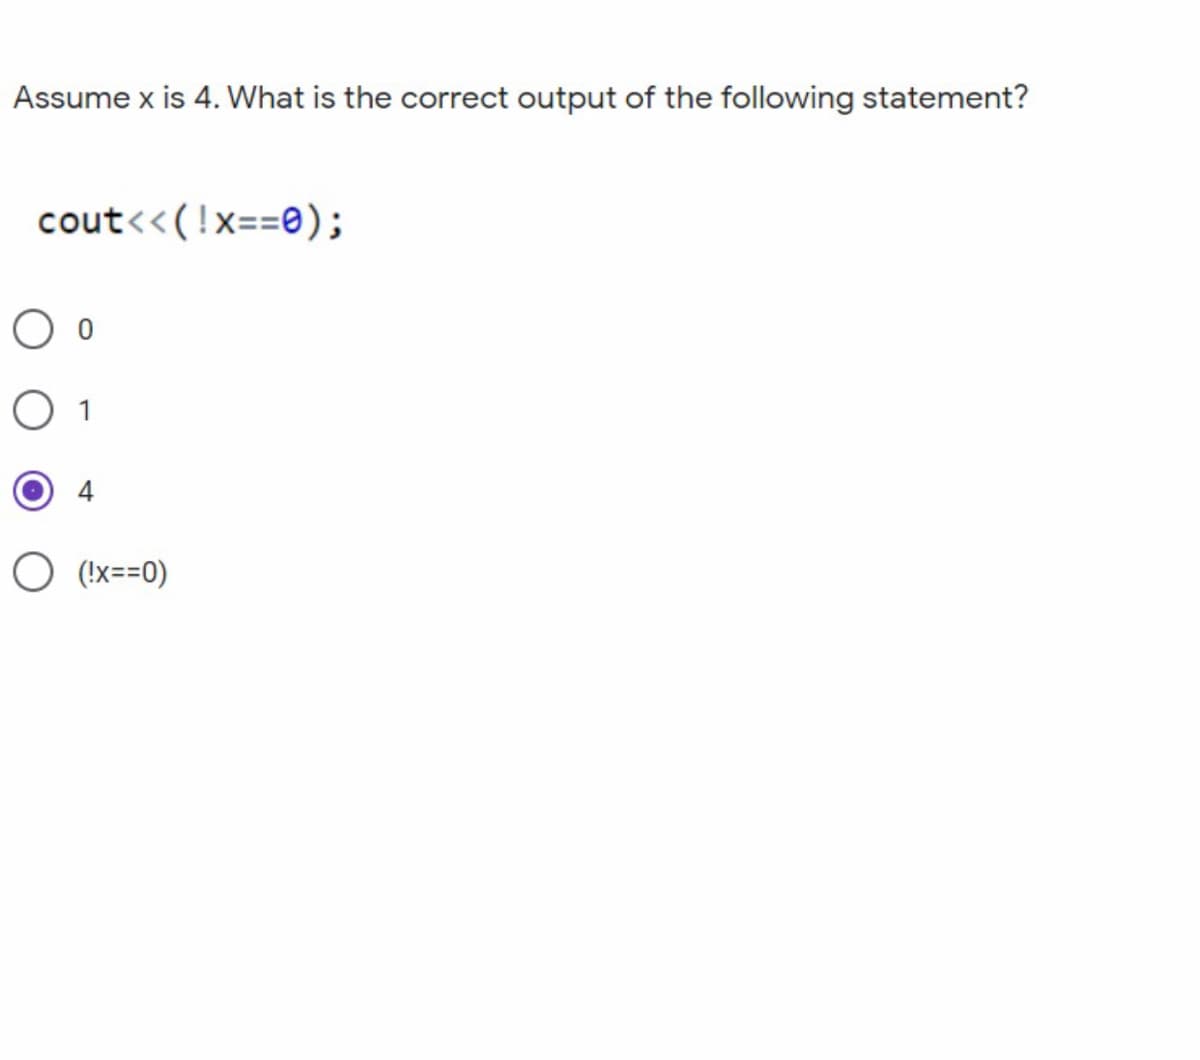 Assume x is 4. What is the correct output of the following statement?
cout<<(!x==e);
1
(!x==0)
